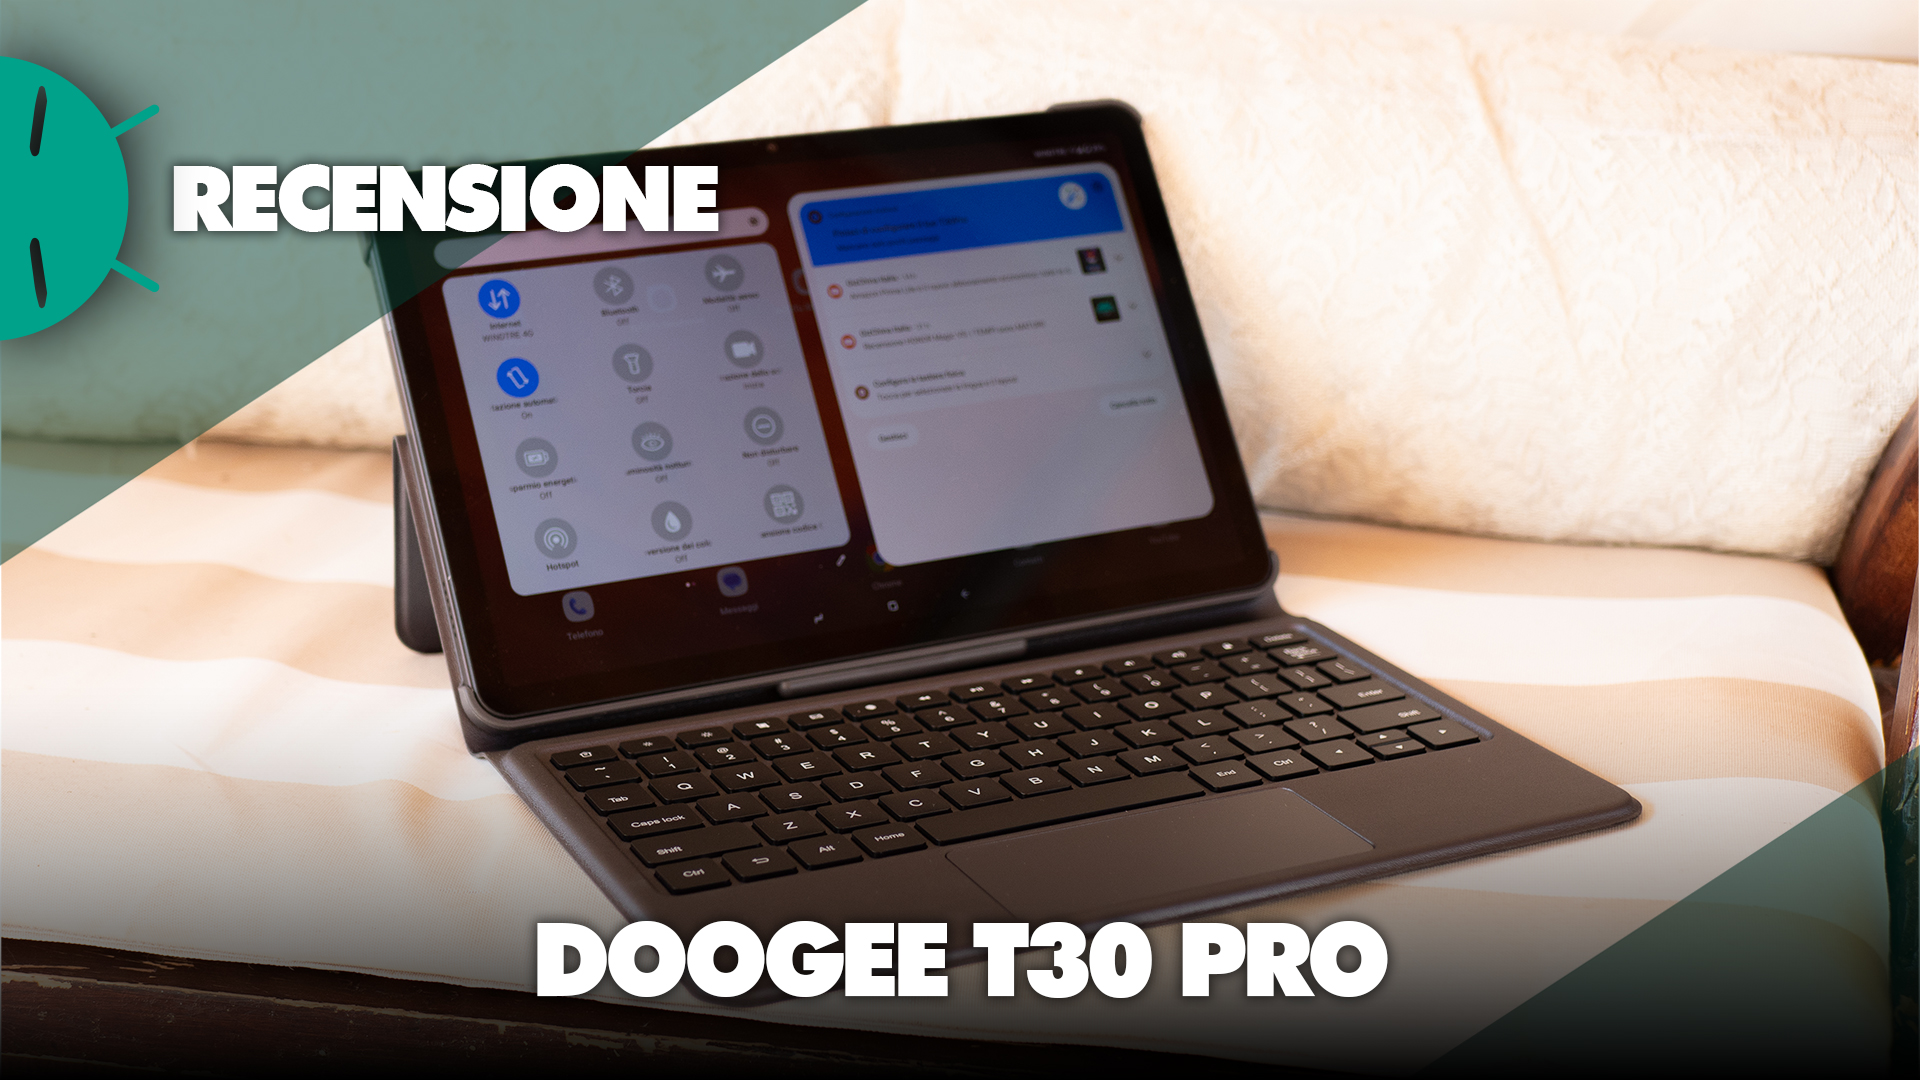 Doogee T30 Pro review: with keyboard and touchpad, an above